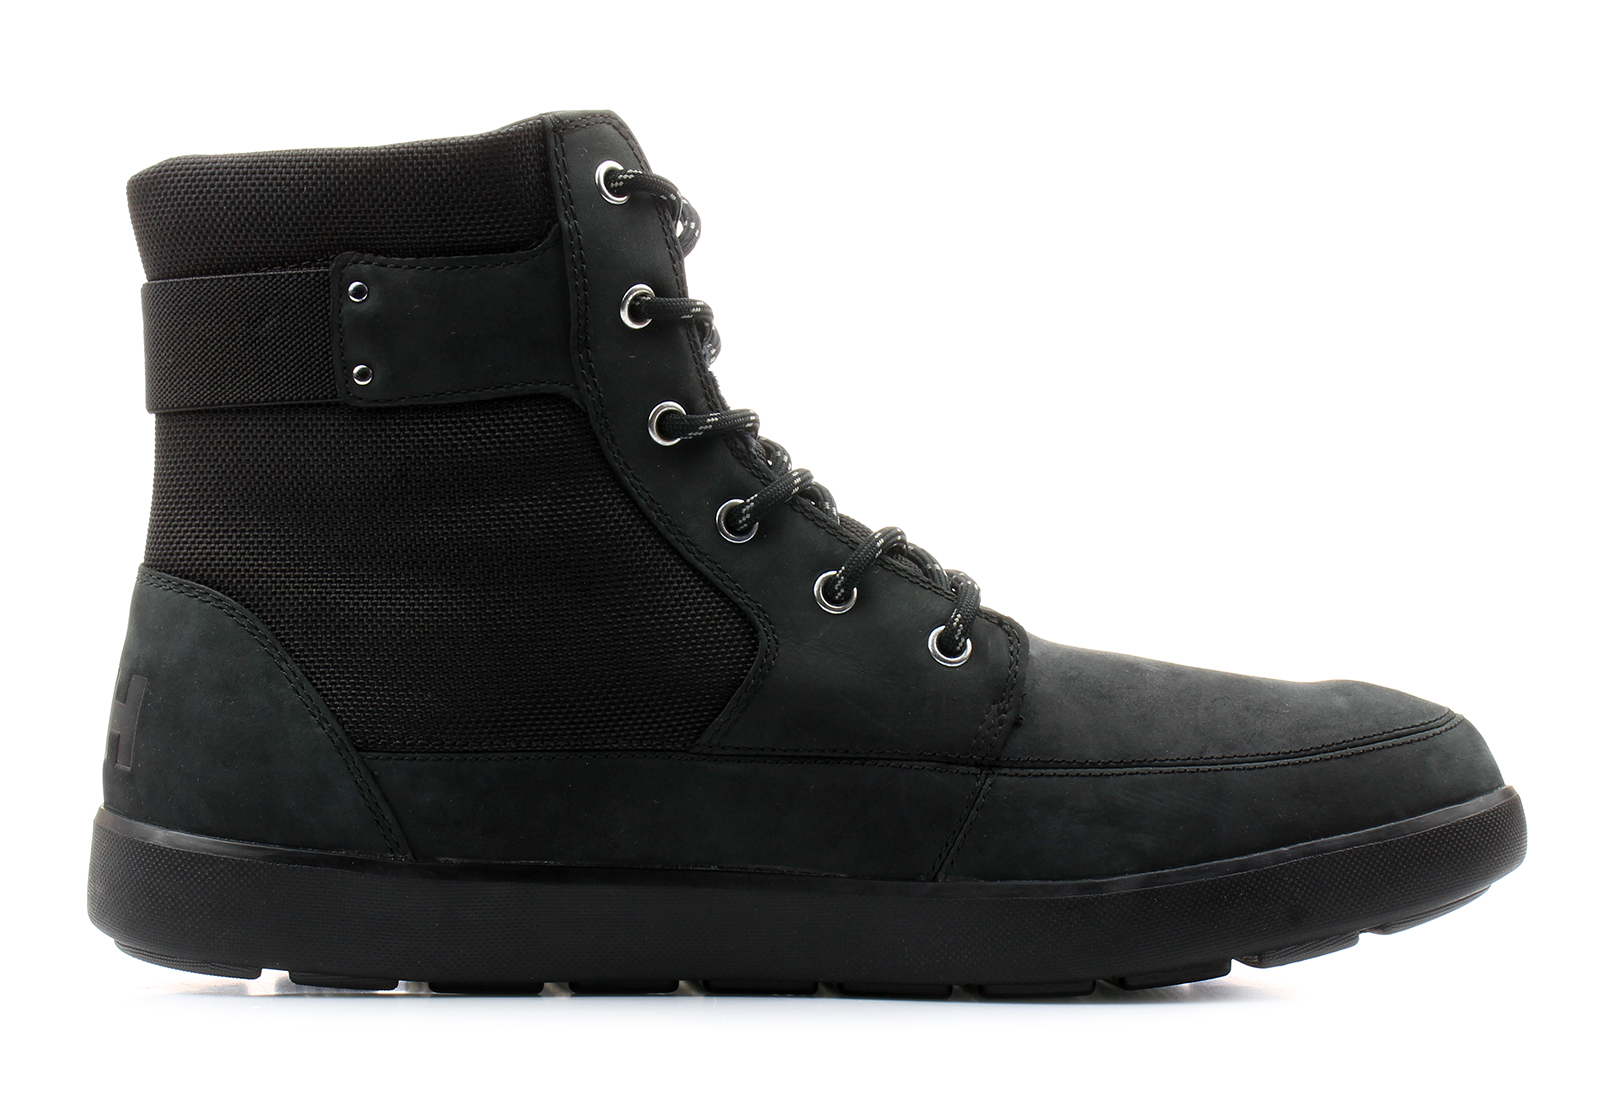 Helly Hansen Boots - Stockholm - 10999-991 - Online shop for sneakers ...